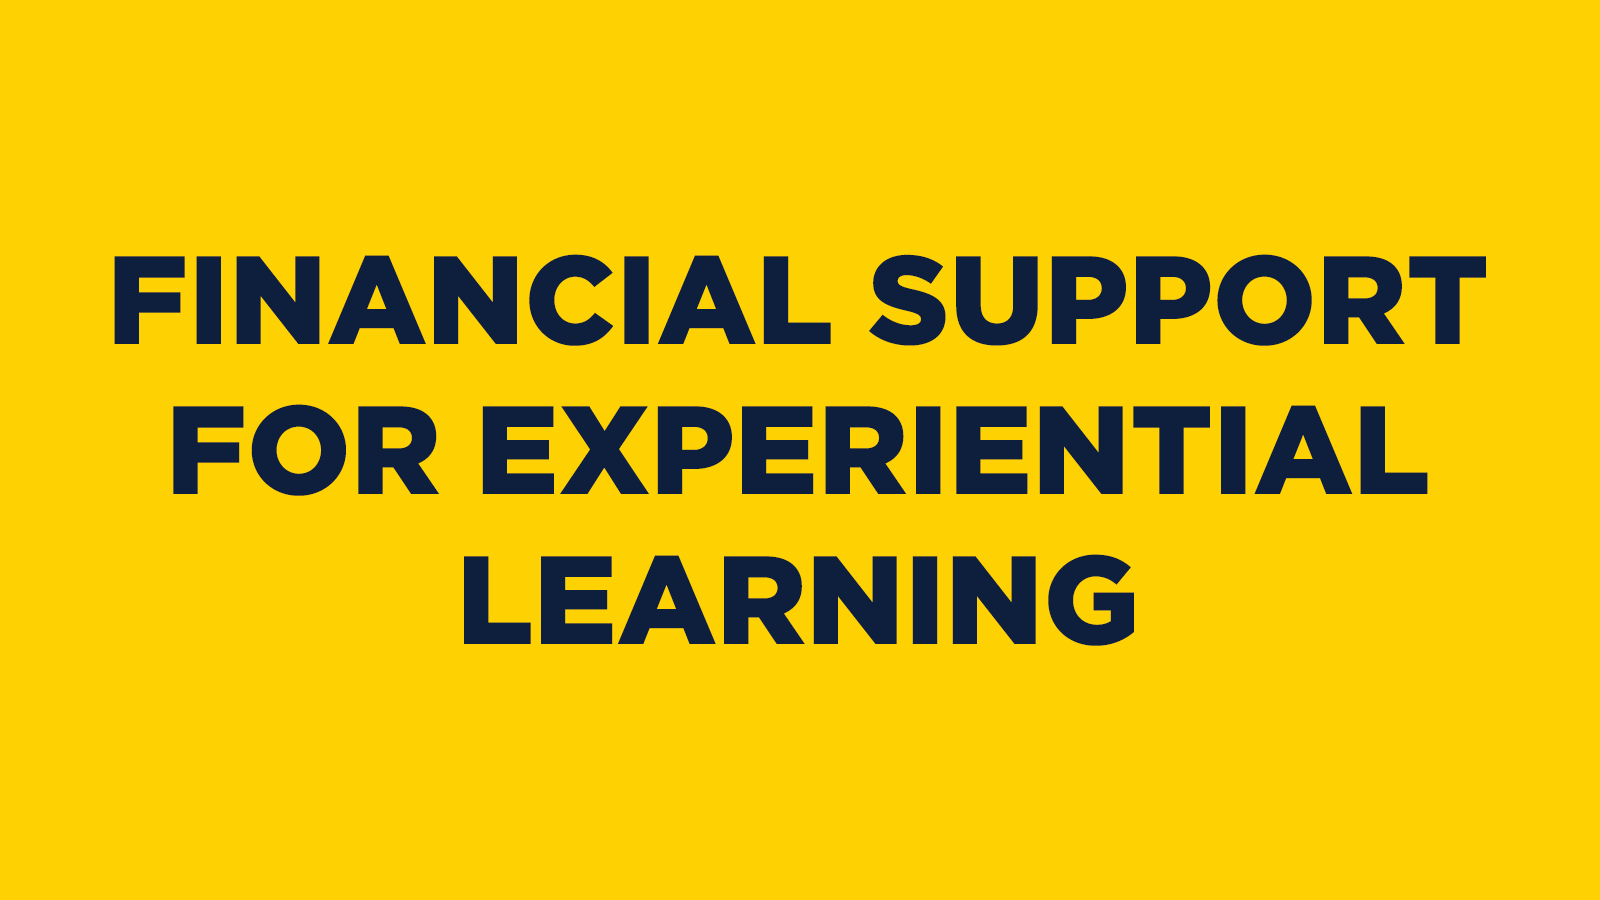 Financial Support for Experiential Learning